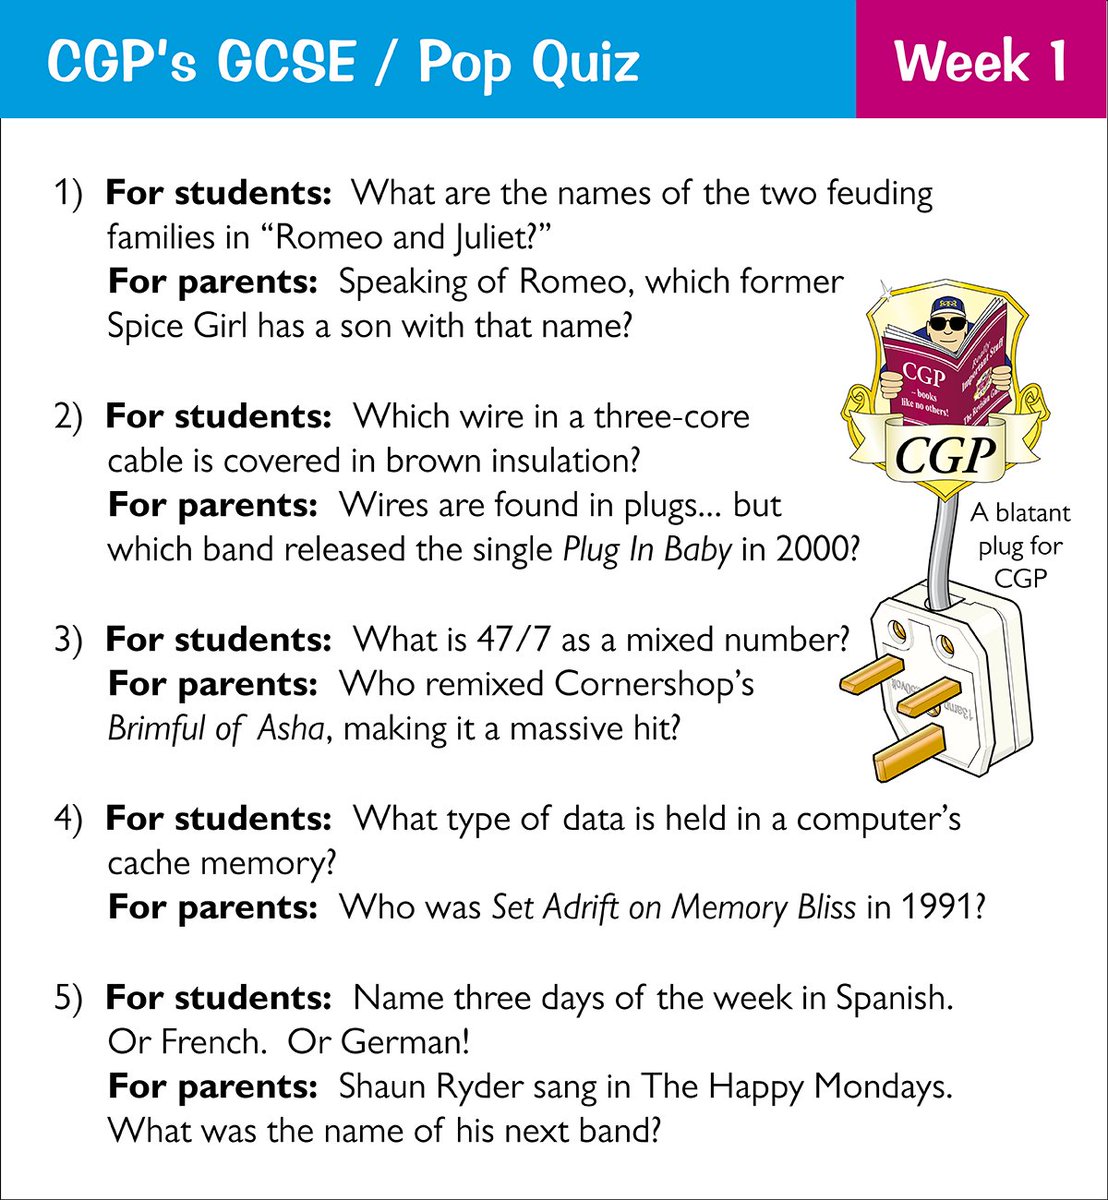 CGP Books "CGP's new weekly quiz is here to take your brain to another dimension. Pay close attention. Each GCSE question for students has a matching pop quiz question for